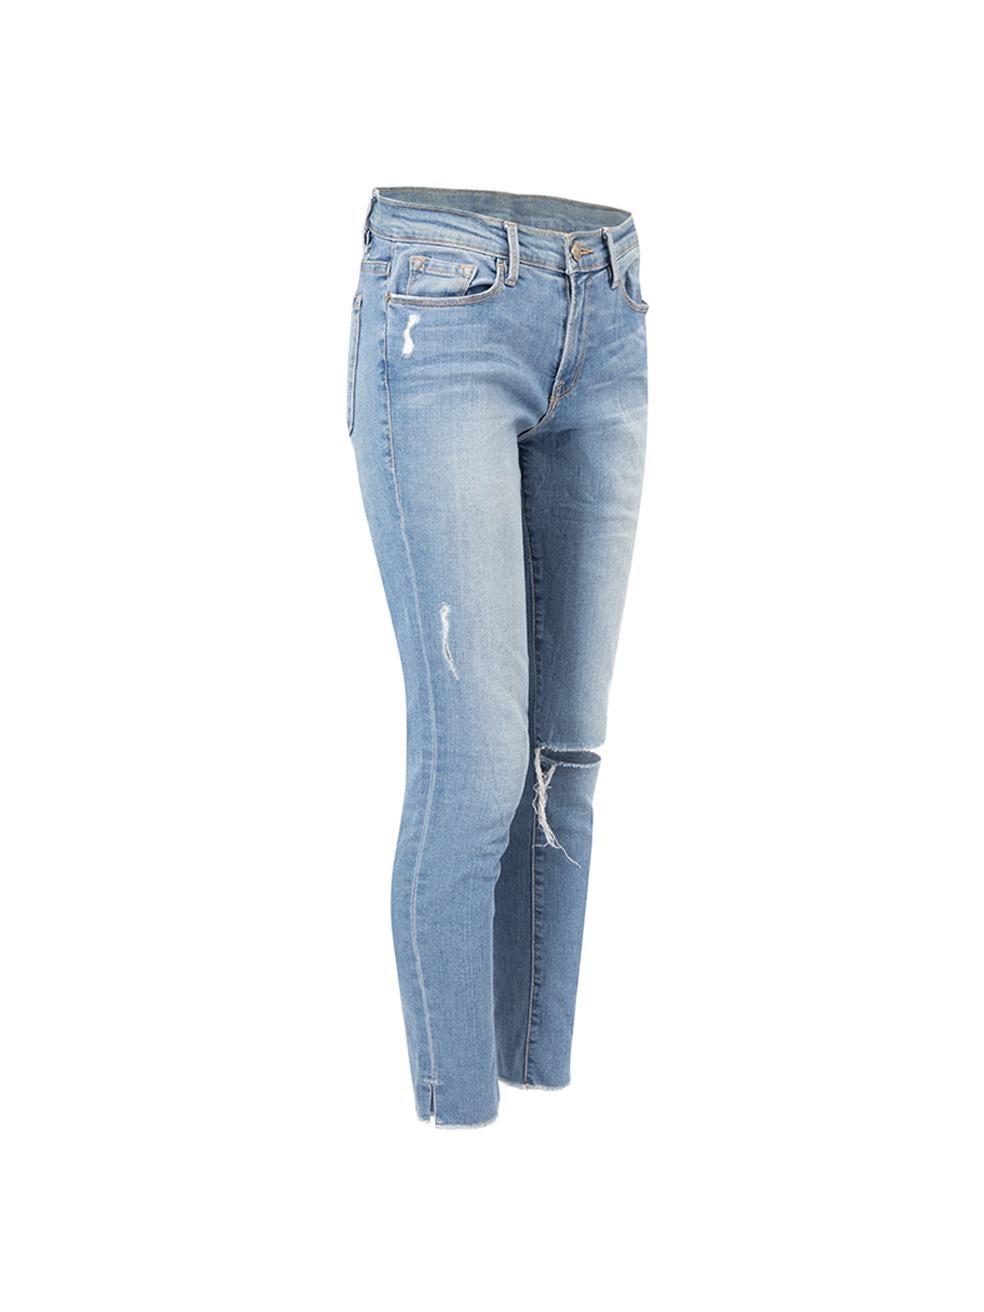 CONDITION is Very good. Minimal wear to jeans is evident. Minimal wear to the waistband and overall denim material which is soft from use on this used Frame designer resale item. 
 
 Details
  Blue
 Denim
 Skinny jeans
 Cropped length
 Mid rise
